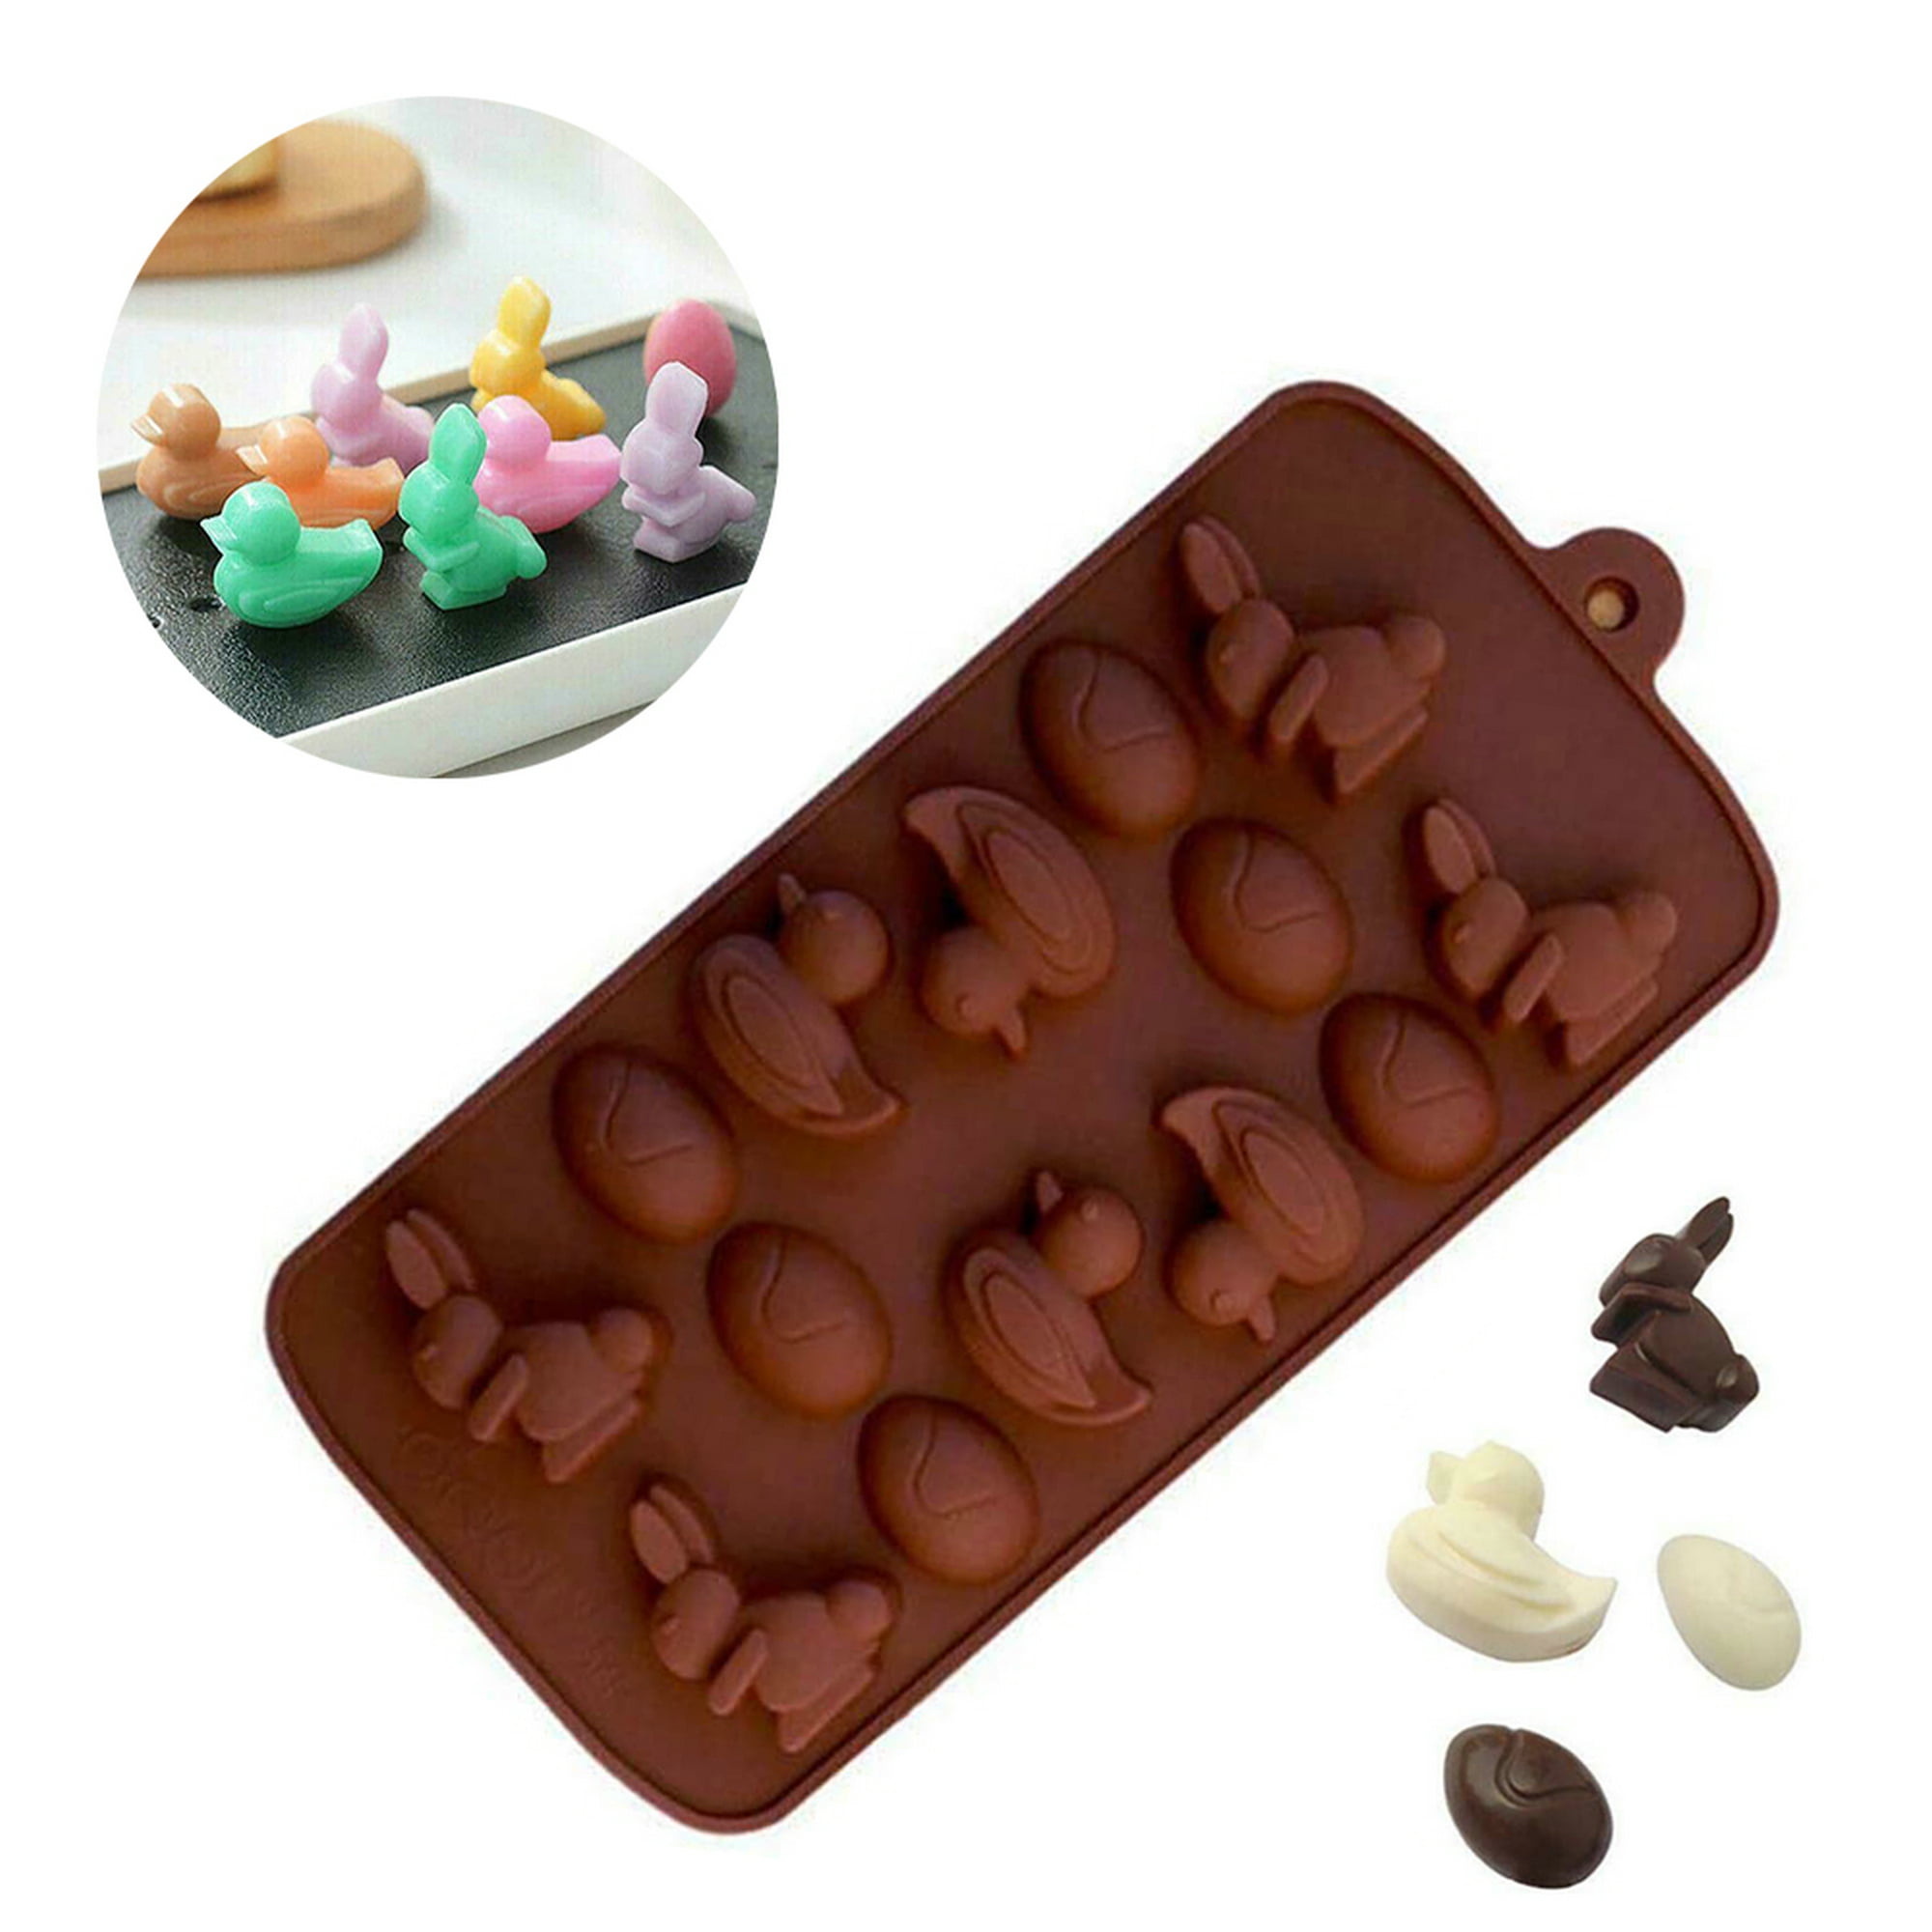 Egg with Flowers Mini Chocolate Mould or Easter Egg Mould